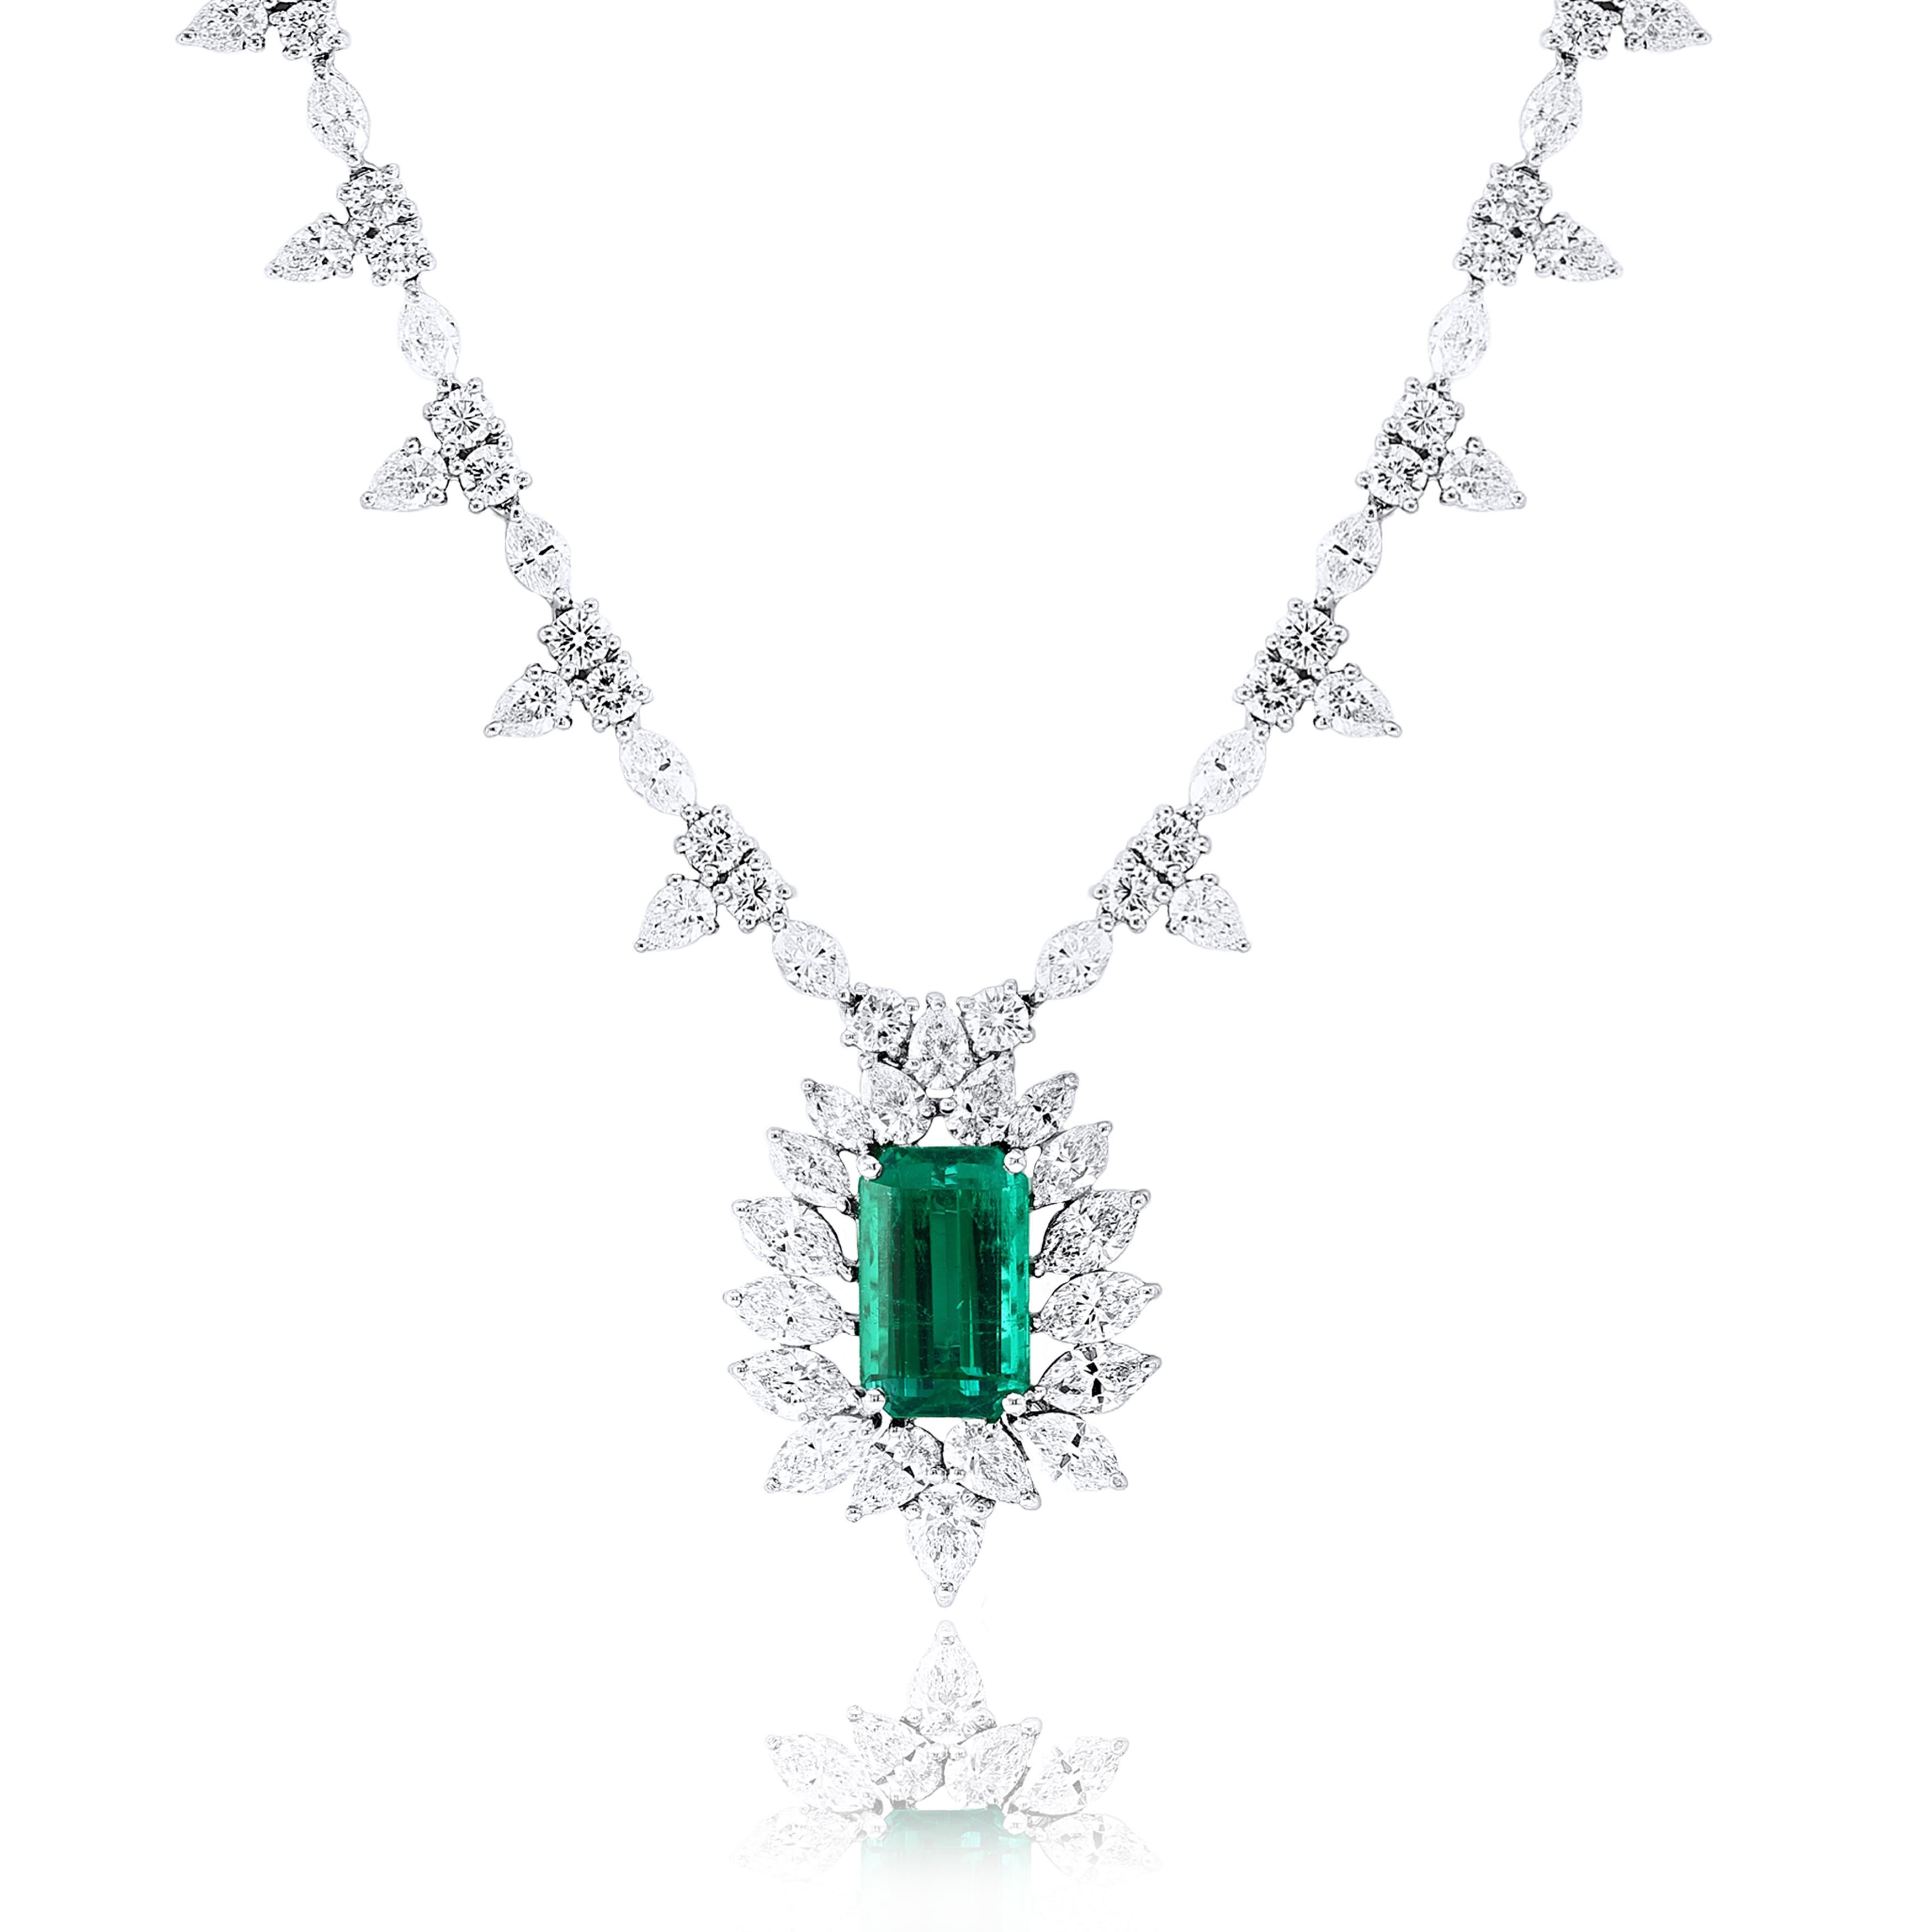 This luxuriously looking  CERTIFIED high-end drop necklace highlighting  1 emerald cut lush green emerald weighing 8.14 carats total set with pear & round shaped diamonds weighing 24.51 carats total. Hand-crafted in Platinum.